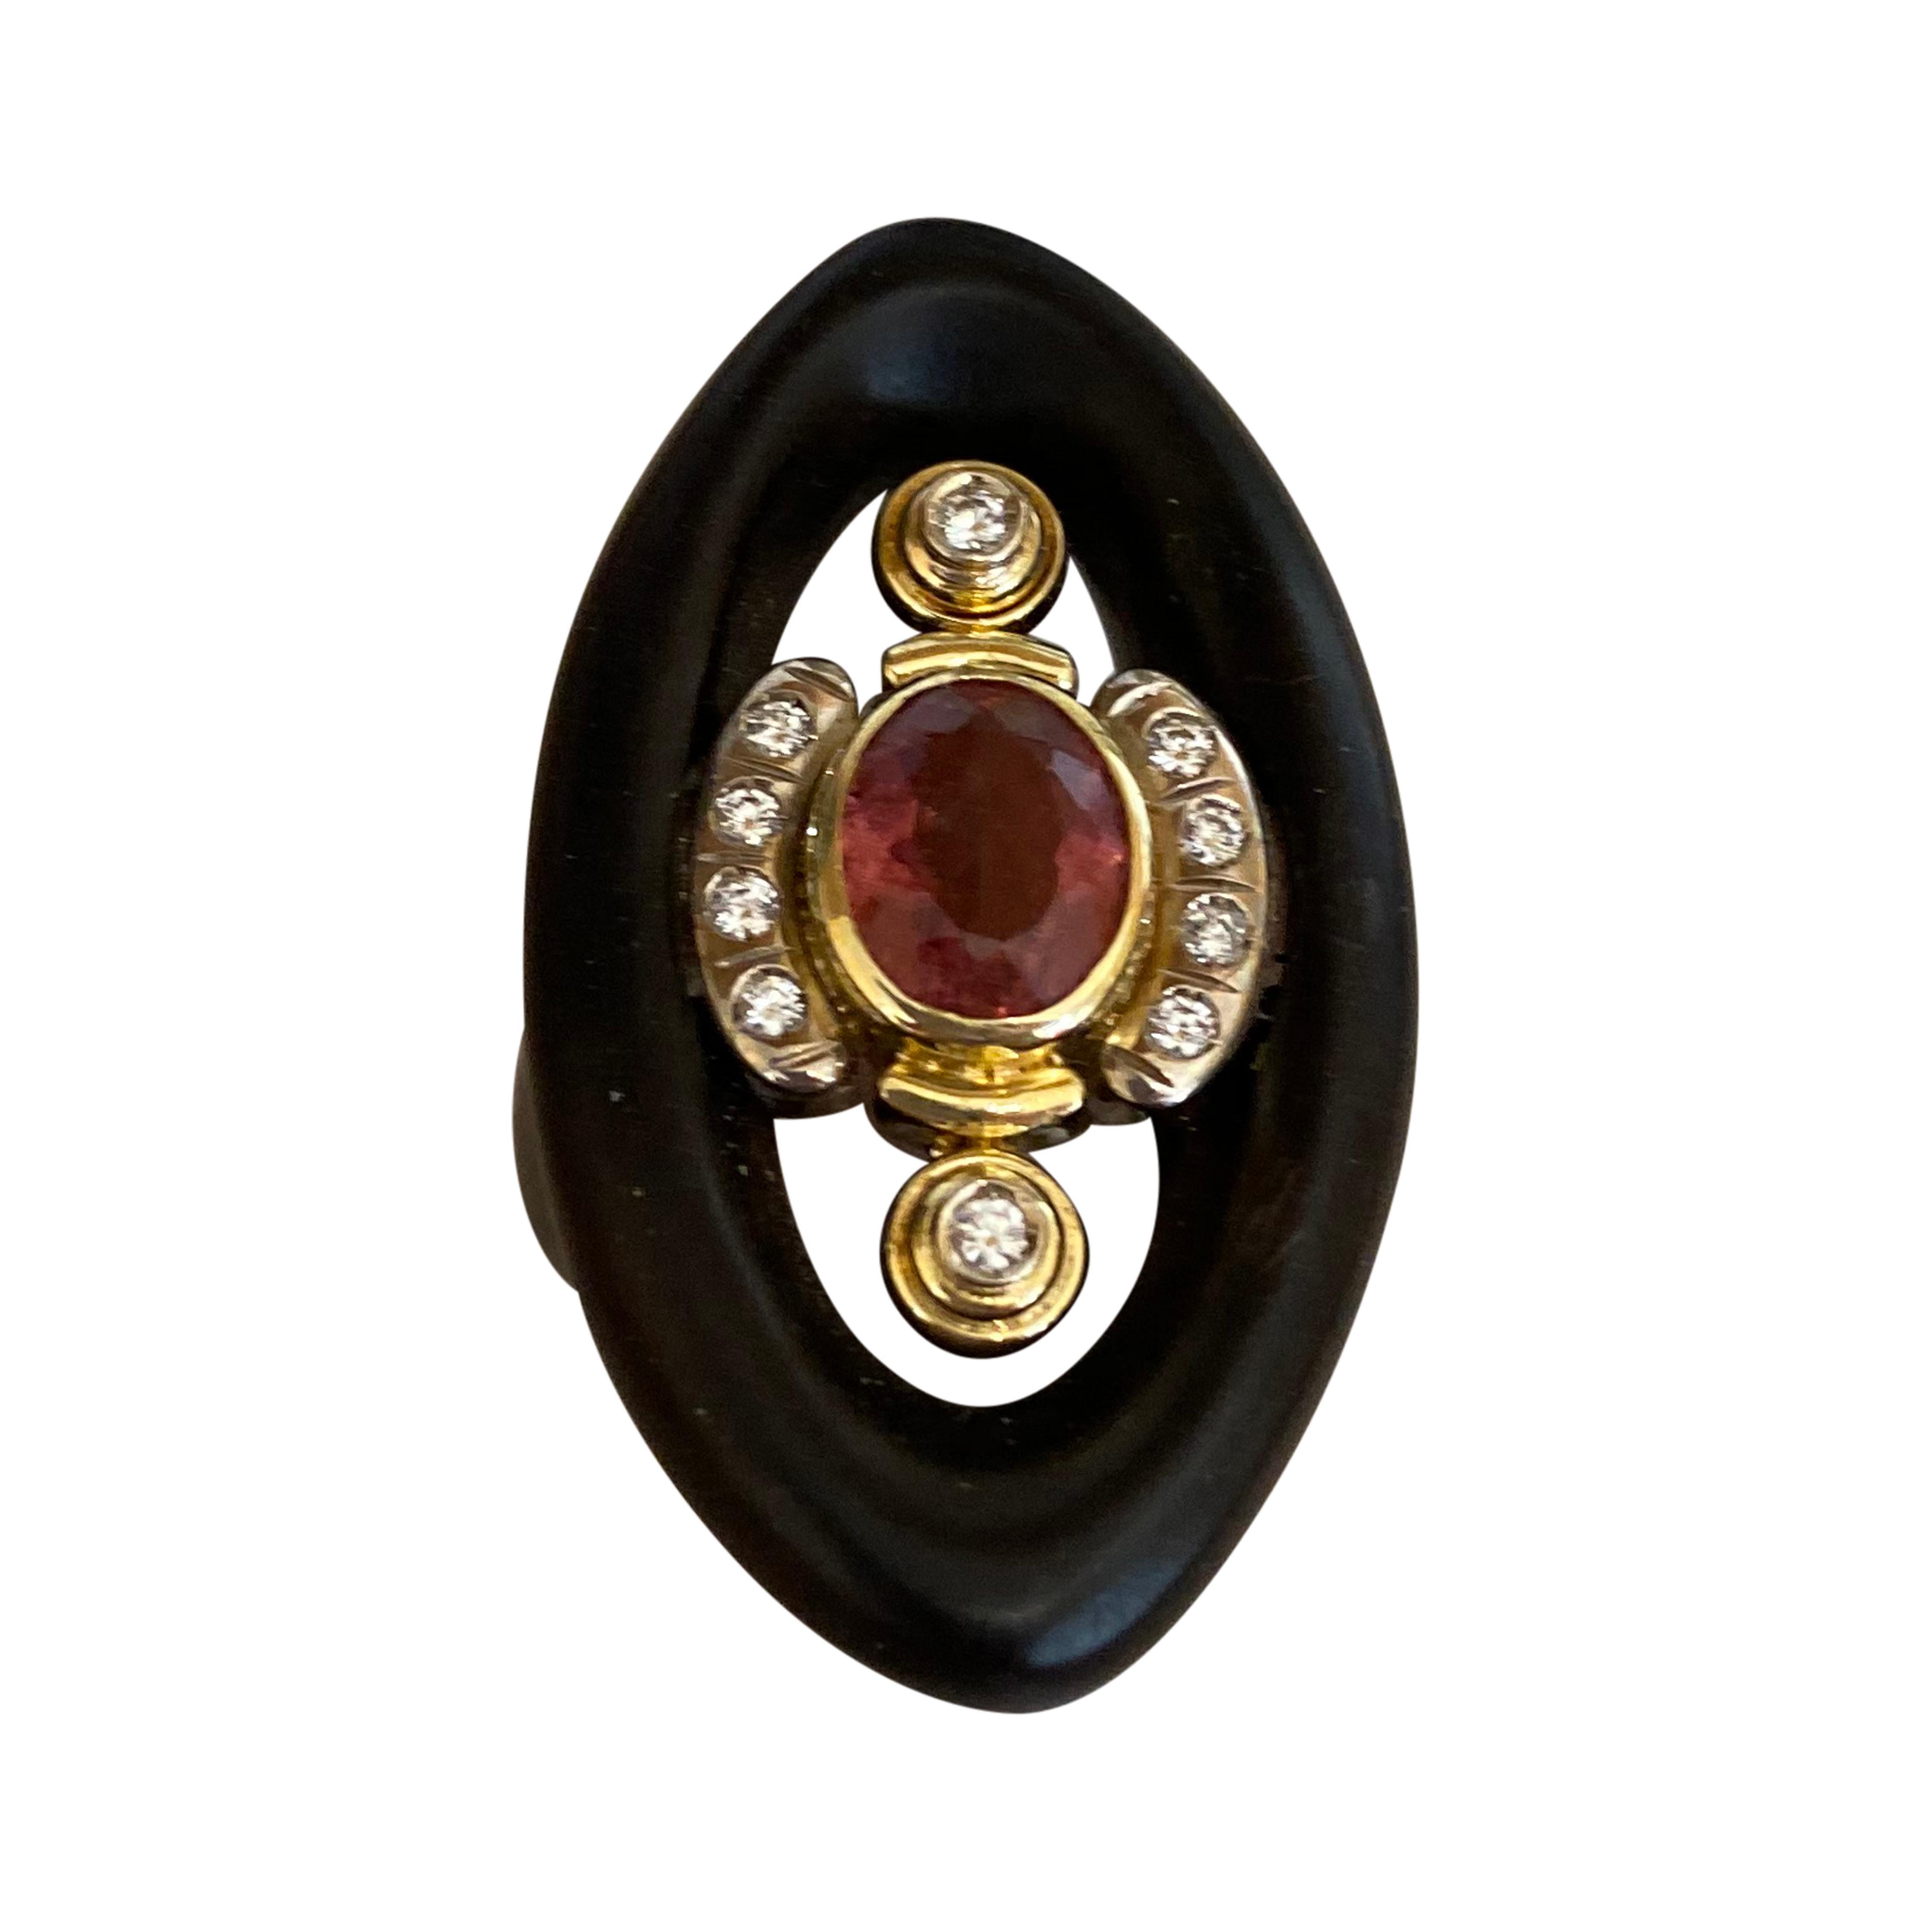 A hand carved gold lined marquise shape Ebony wood Cocktail Ring designed with a faceted pink Tourmaline center and diamonds around. Set in 18 karat yellow gold, signed Sorab & Roshi. FS-7.5
PT=2.65 cts., Dia=0.35 cts.